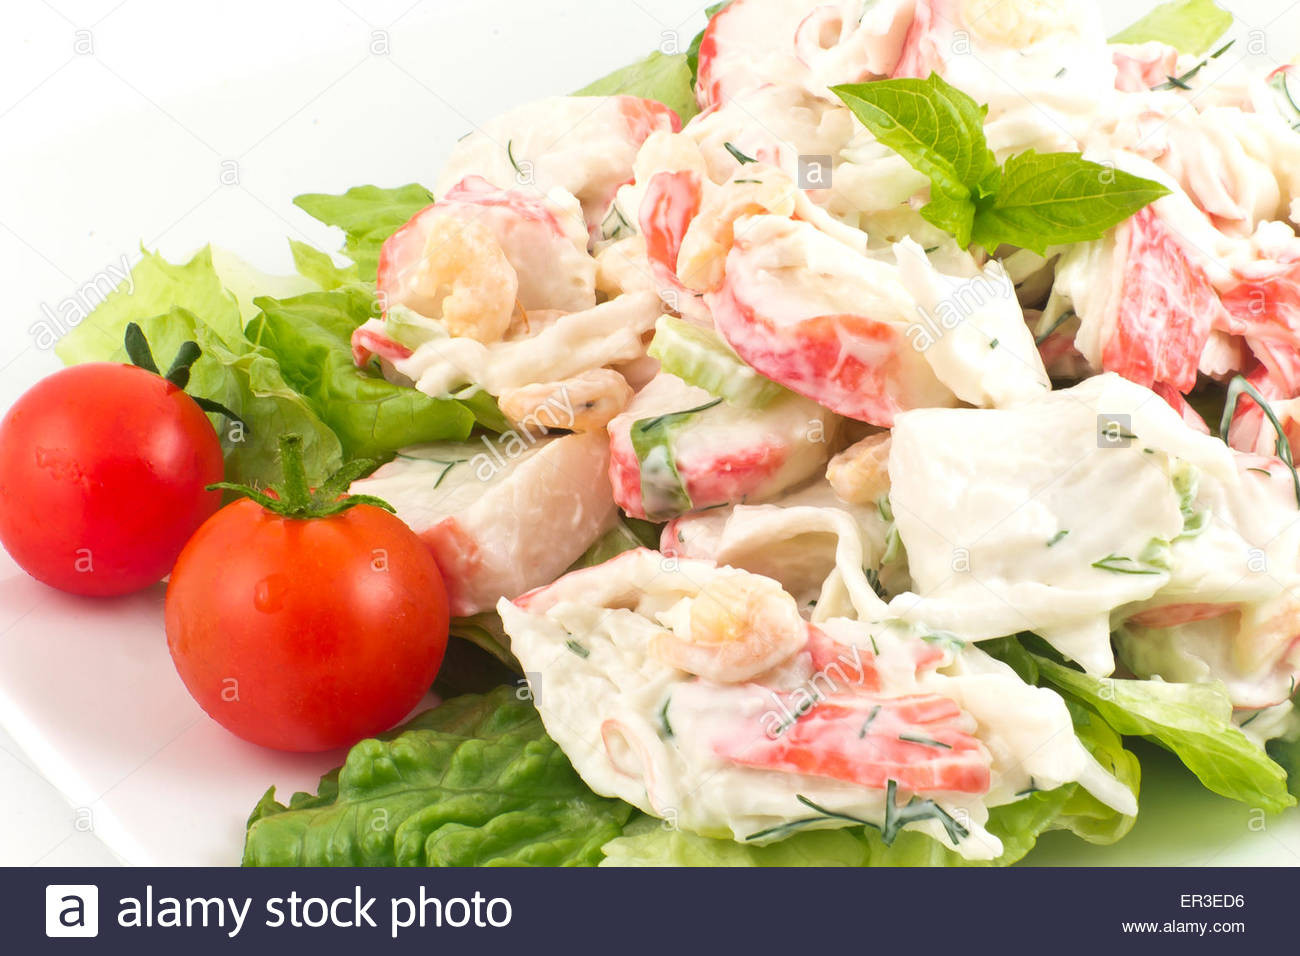 Seafood Salad With Shrimp And Crab
 Mayonnaise seafood salad with shrimp and crab meat and